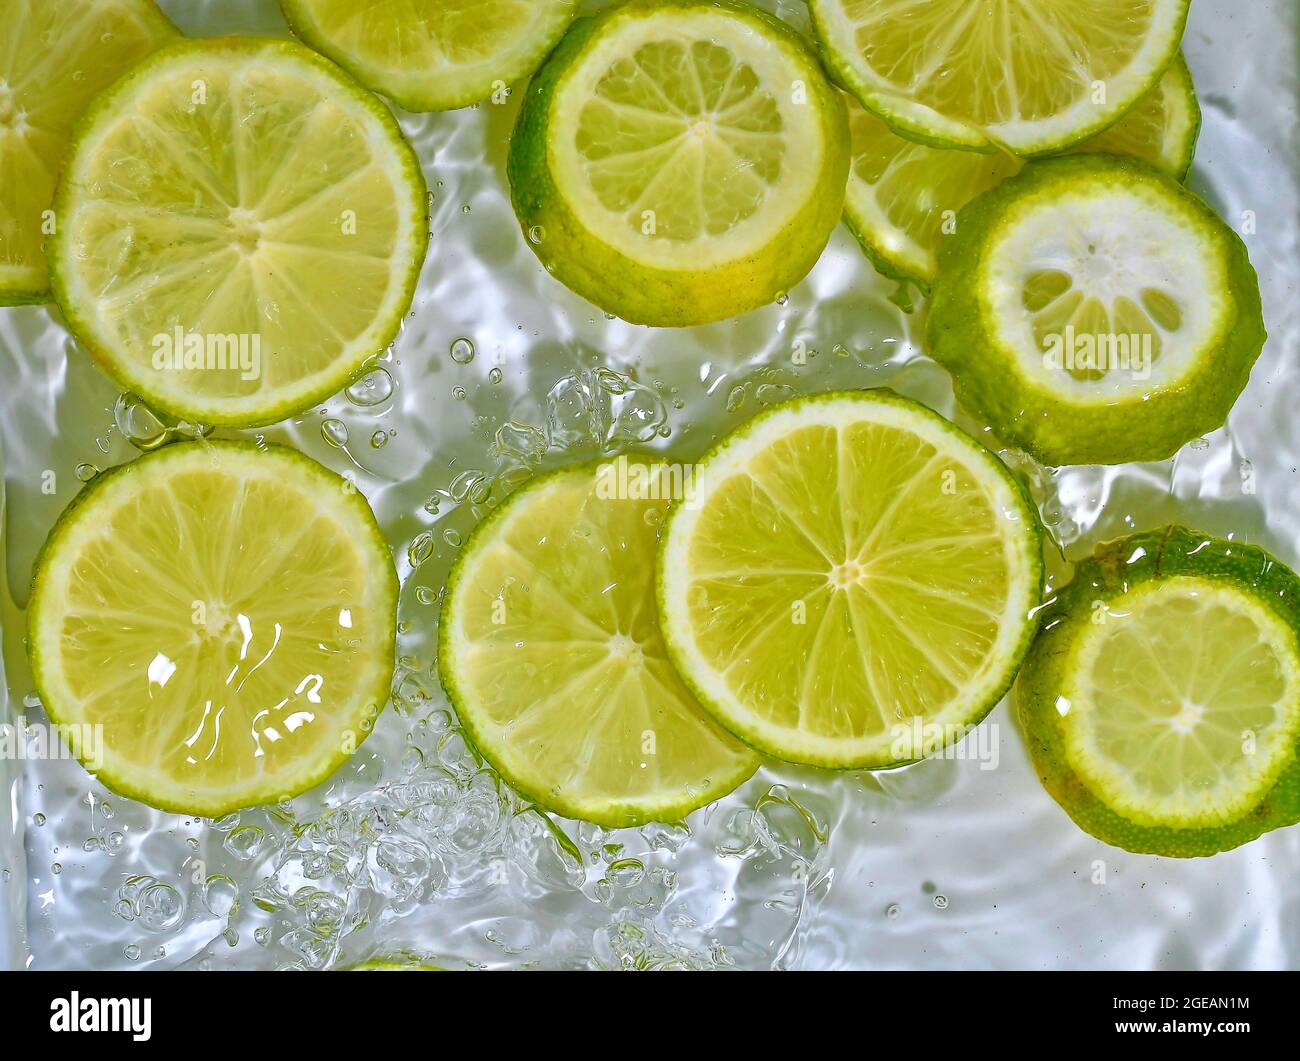 Close-up fresh slices of green limes on white background. Slices of limes in sparkling water on white background, closeup. Citrus soda. Copy space Stock Photo